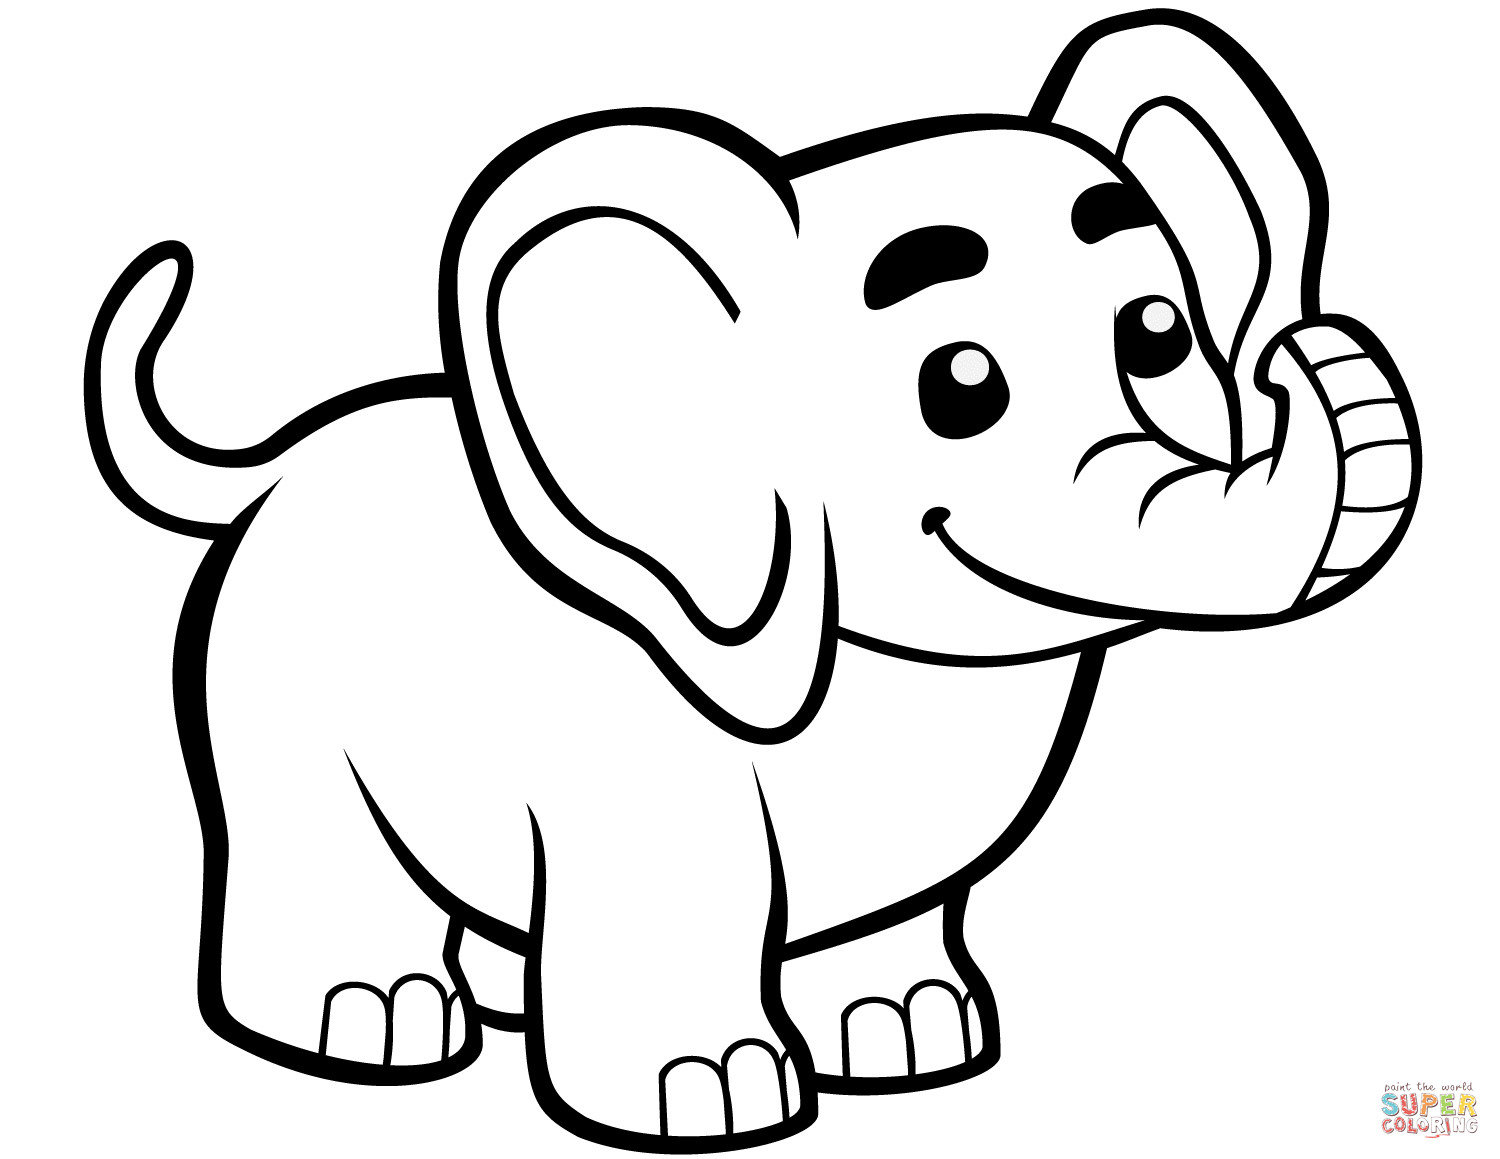 Cute Baby Elephant Coloring Pages
 Cute Baby Elephant coloring page